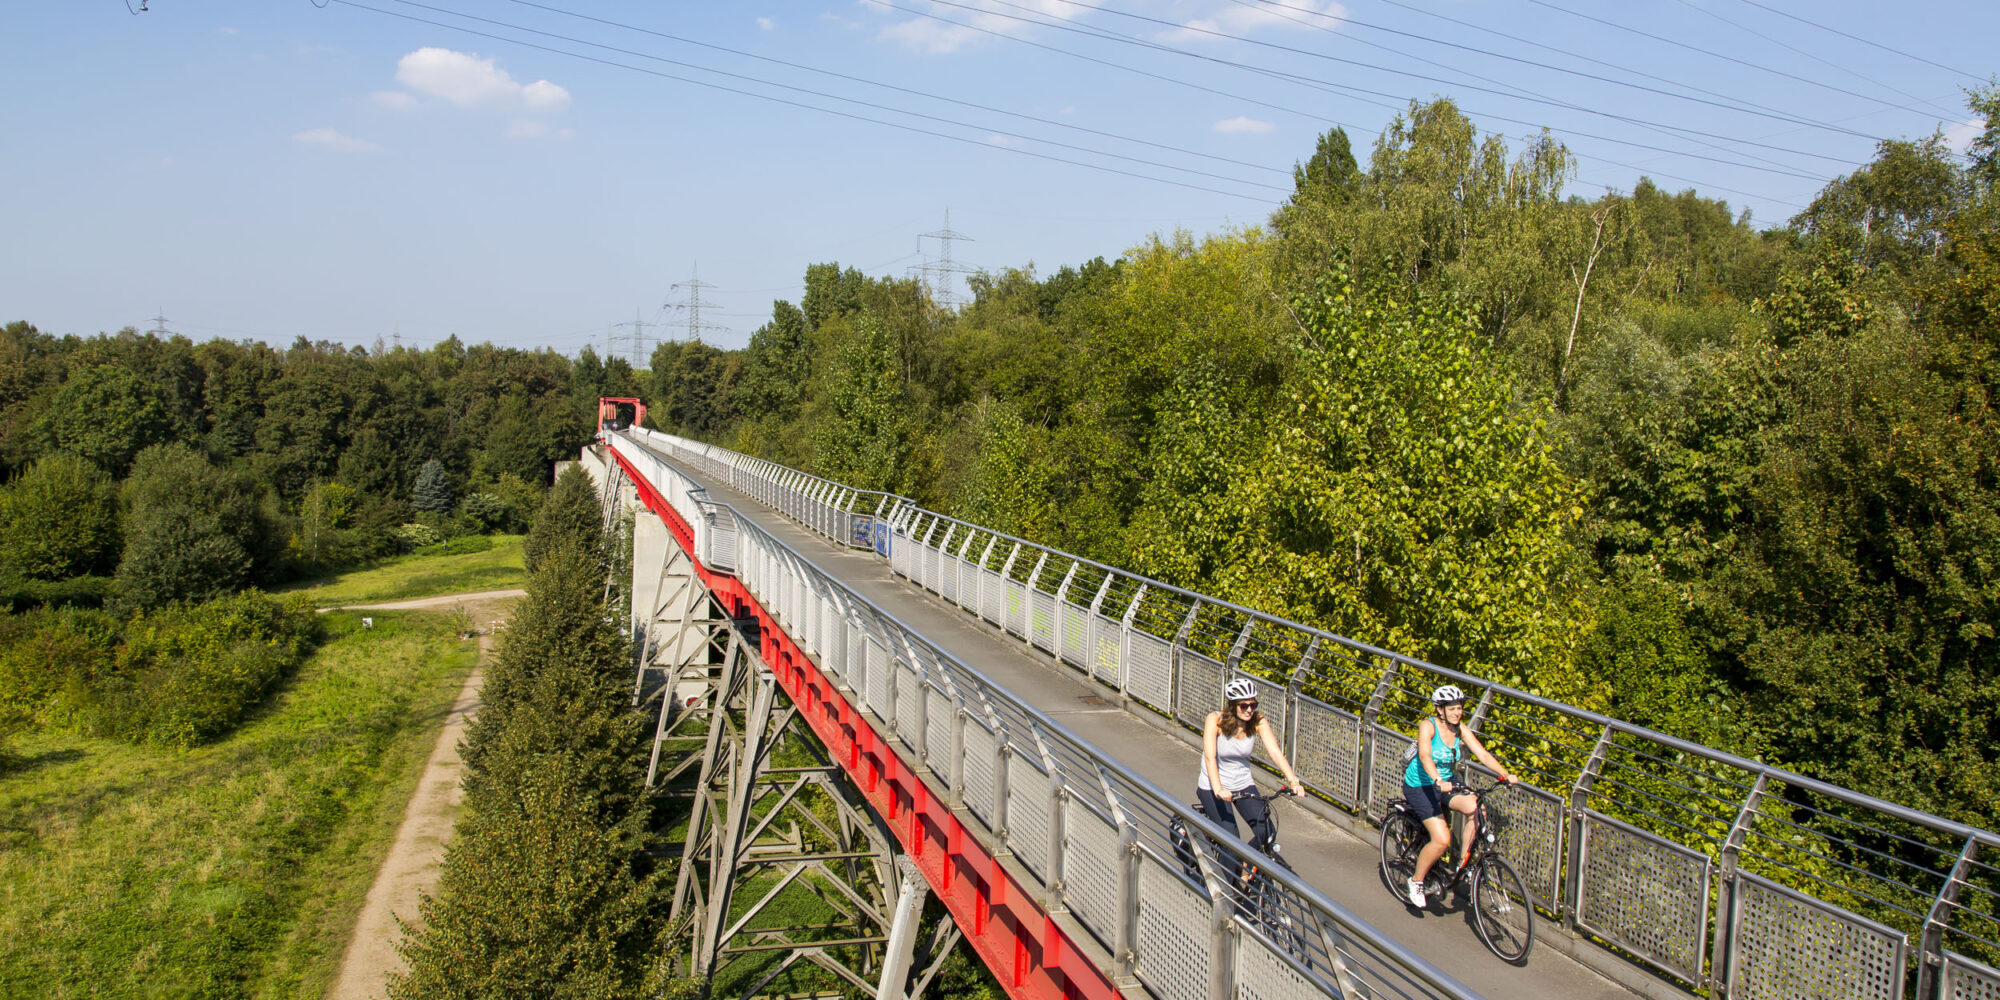 The photo shows two cyclists on the Erzbahnbrücke of the Erzbahntrasse in Gelsenkirchen on the RevierRoute Probierstück